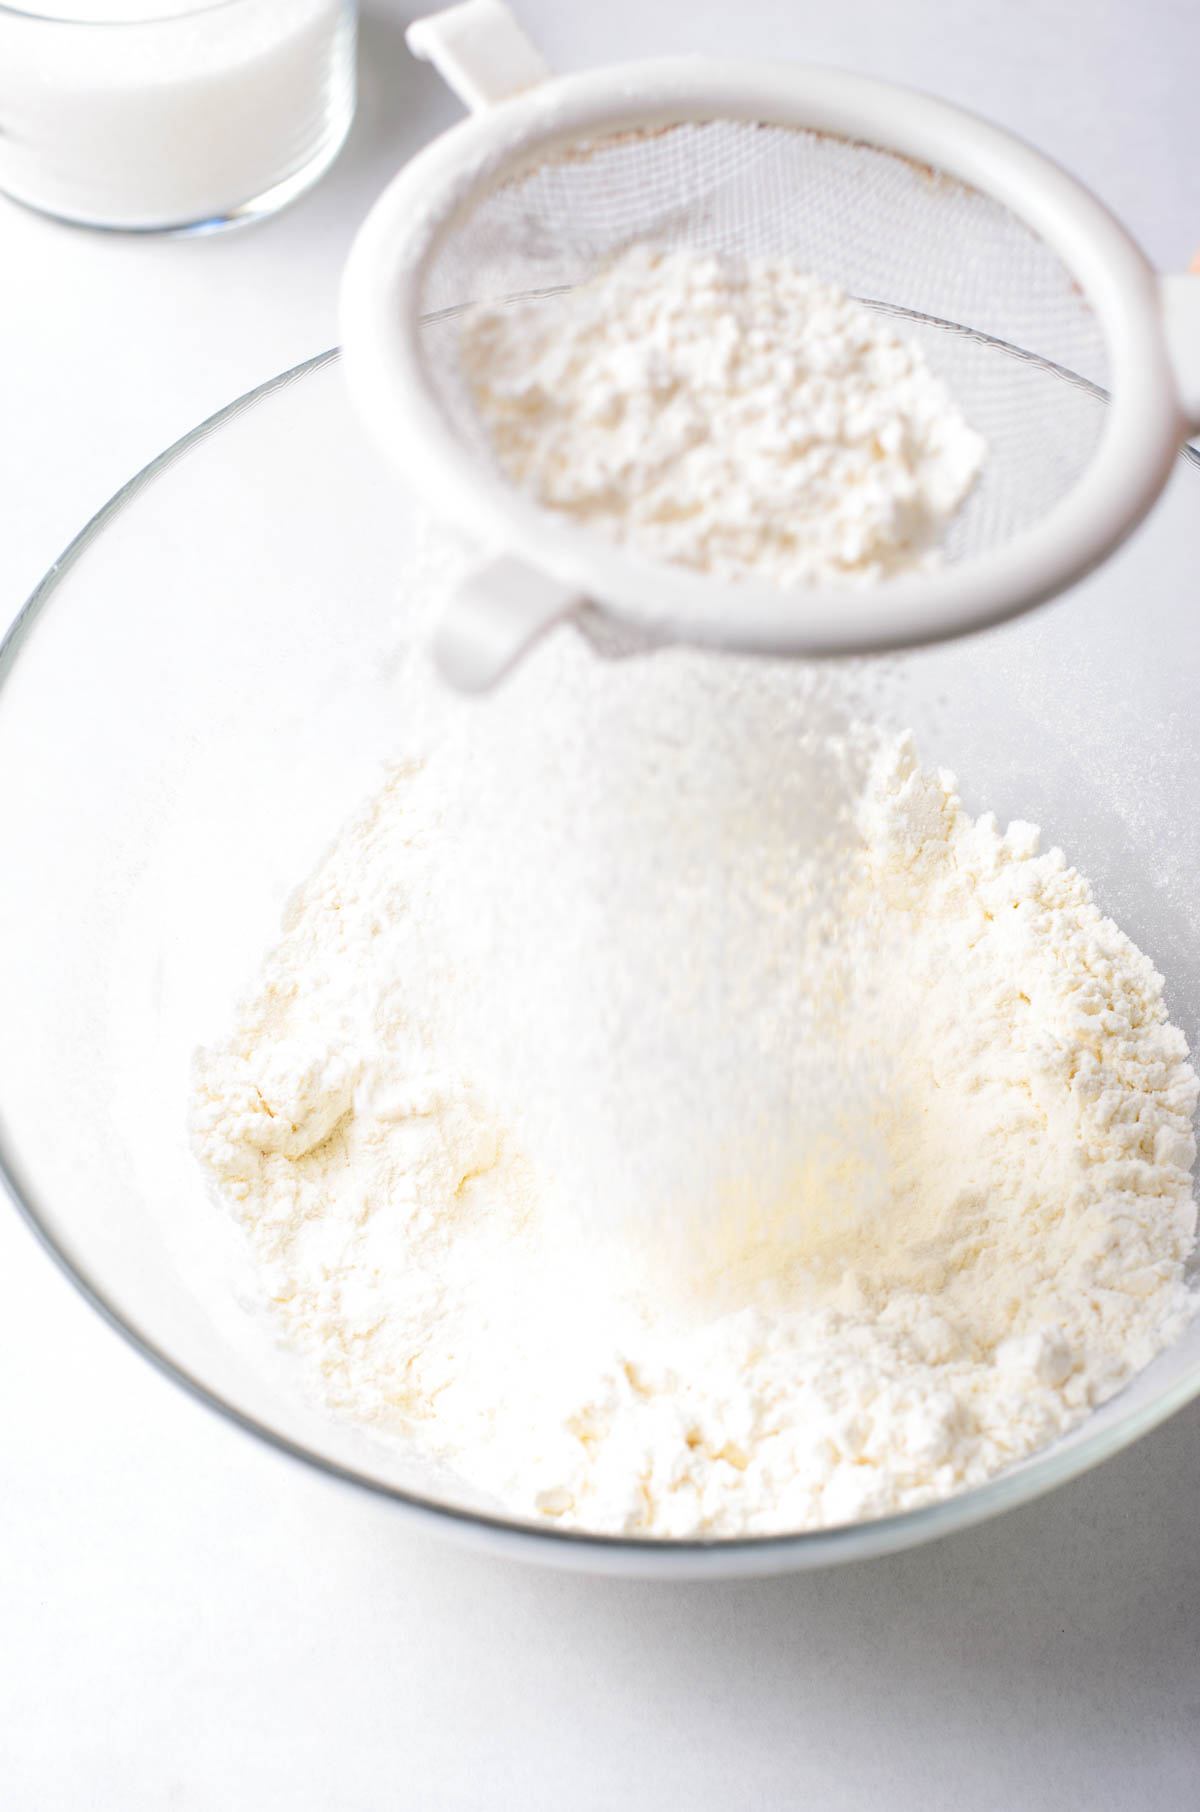 Sifting flour into a bowl with sugar